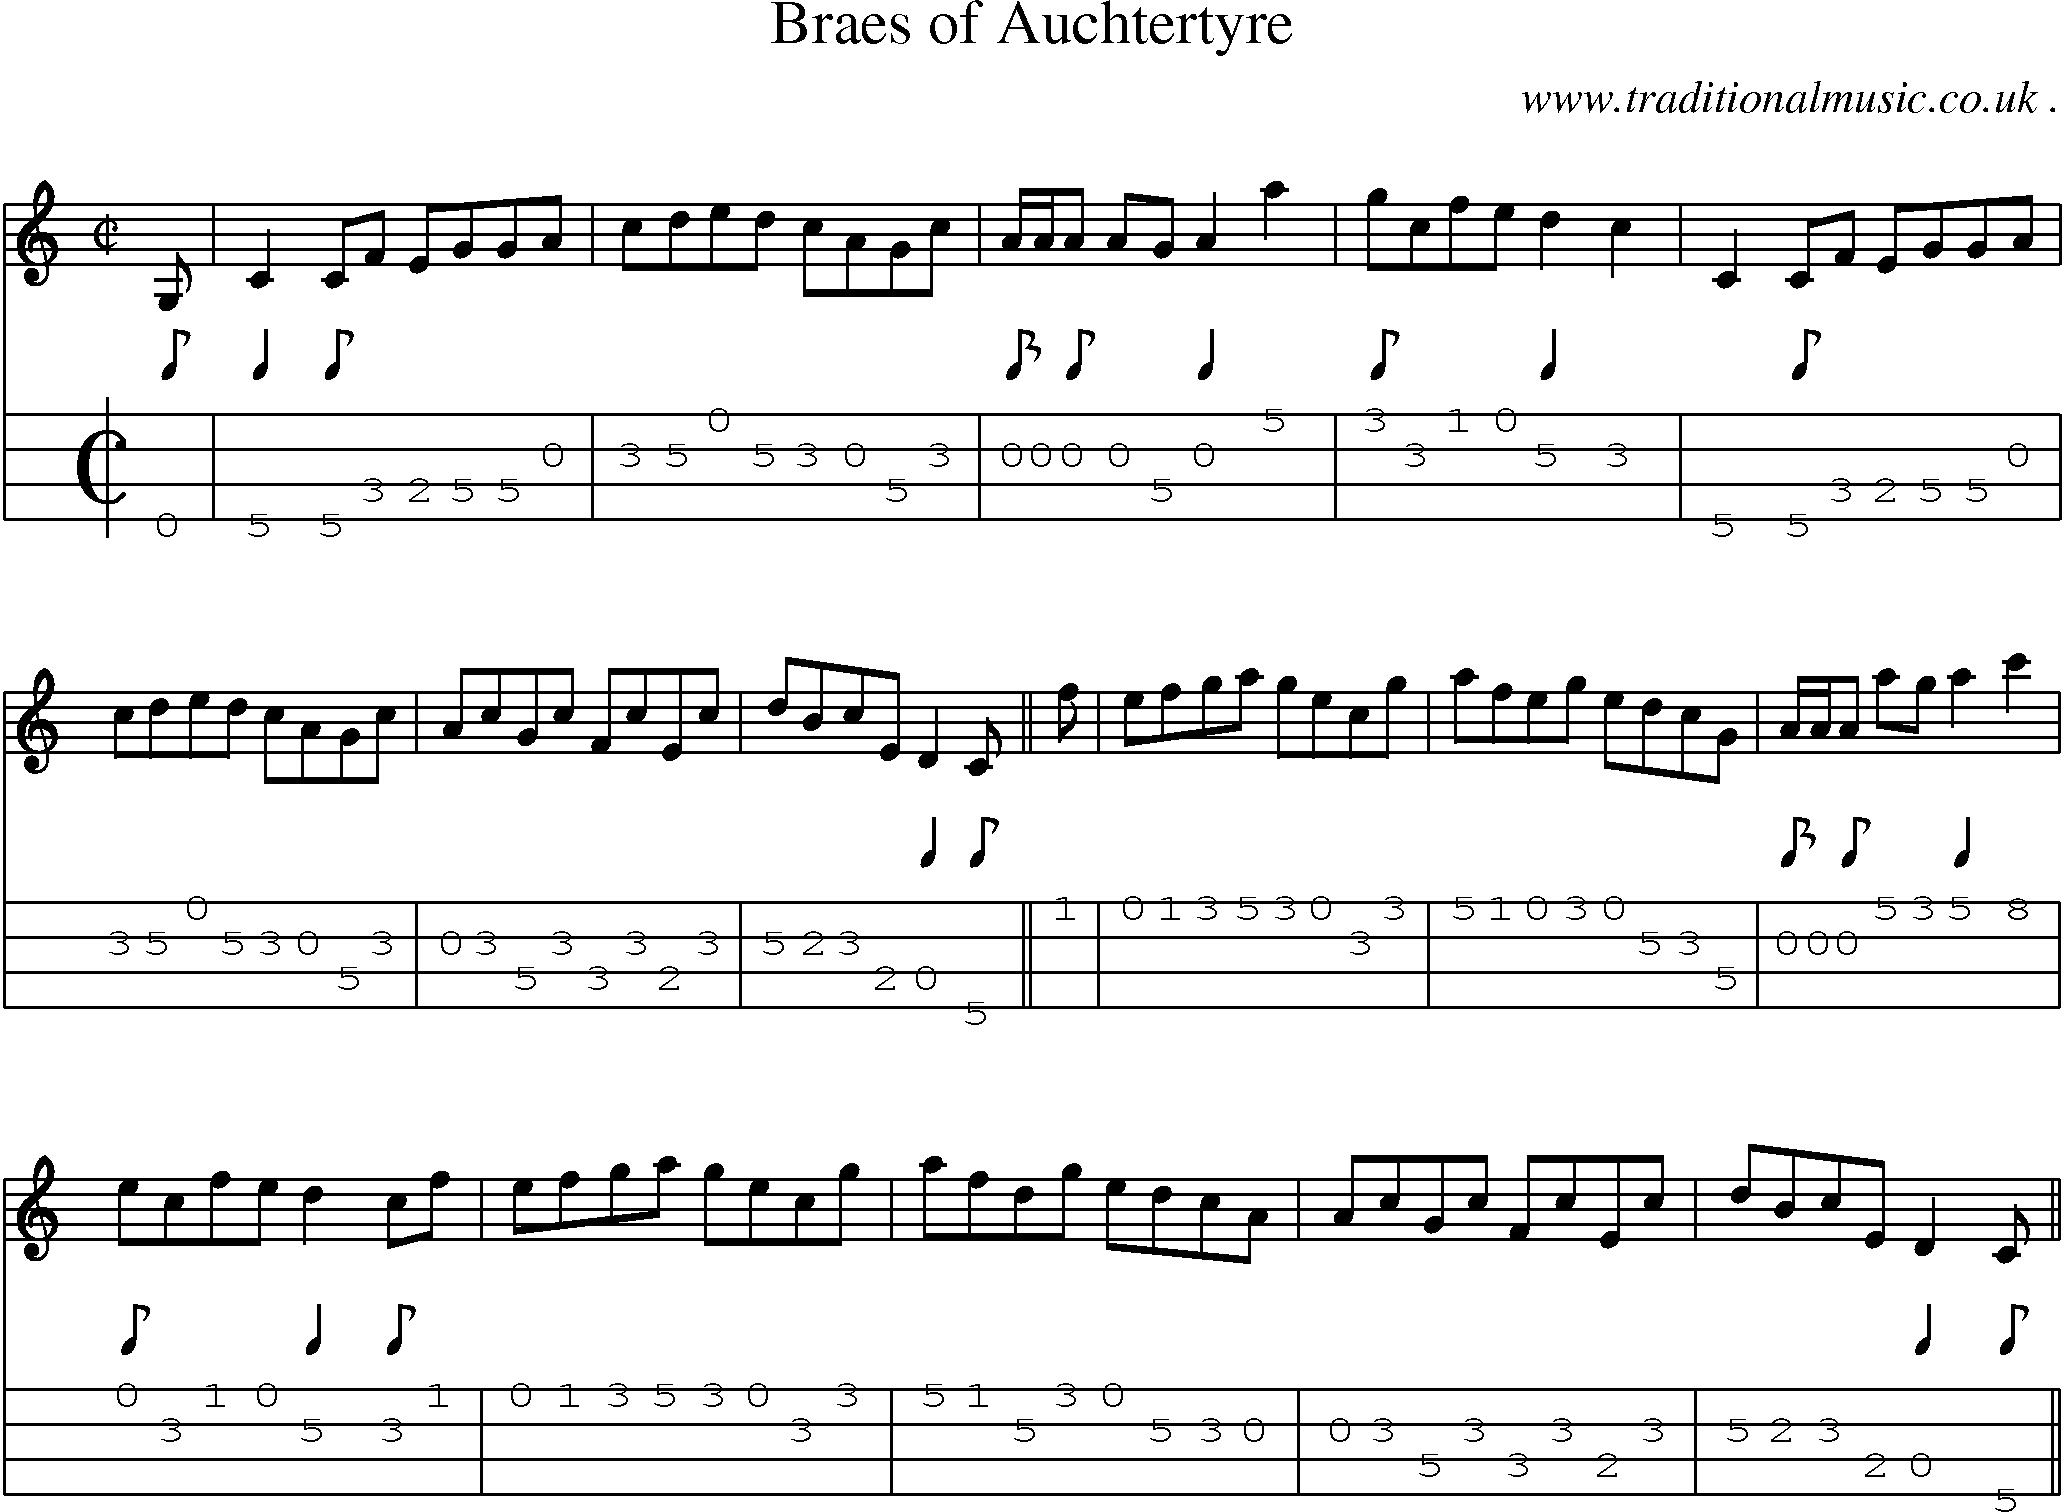 Sheet-music  score, Chords and Mandolin Tabs for Braes Of Auchtertyre